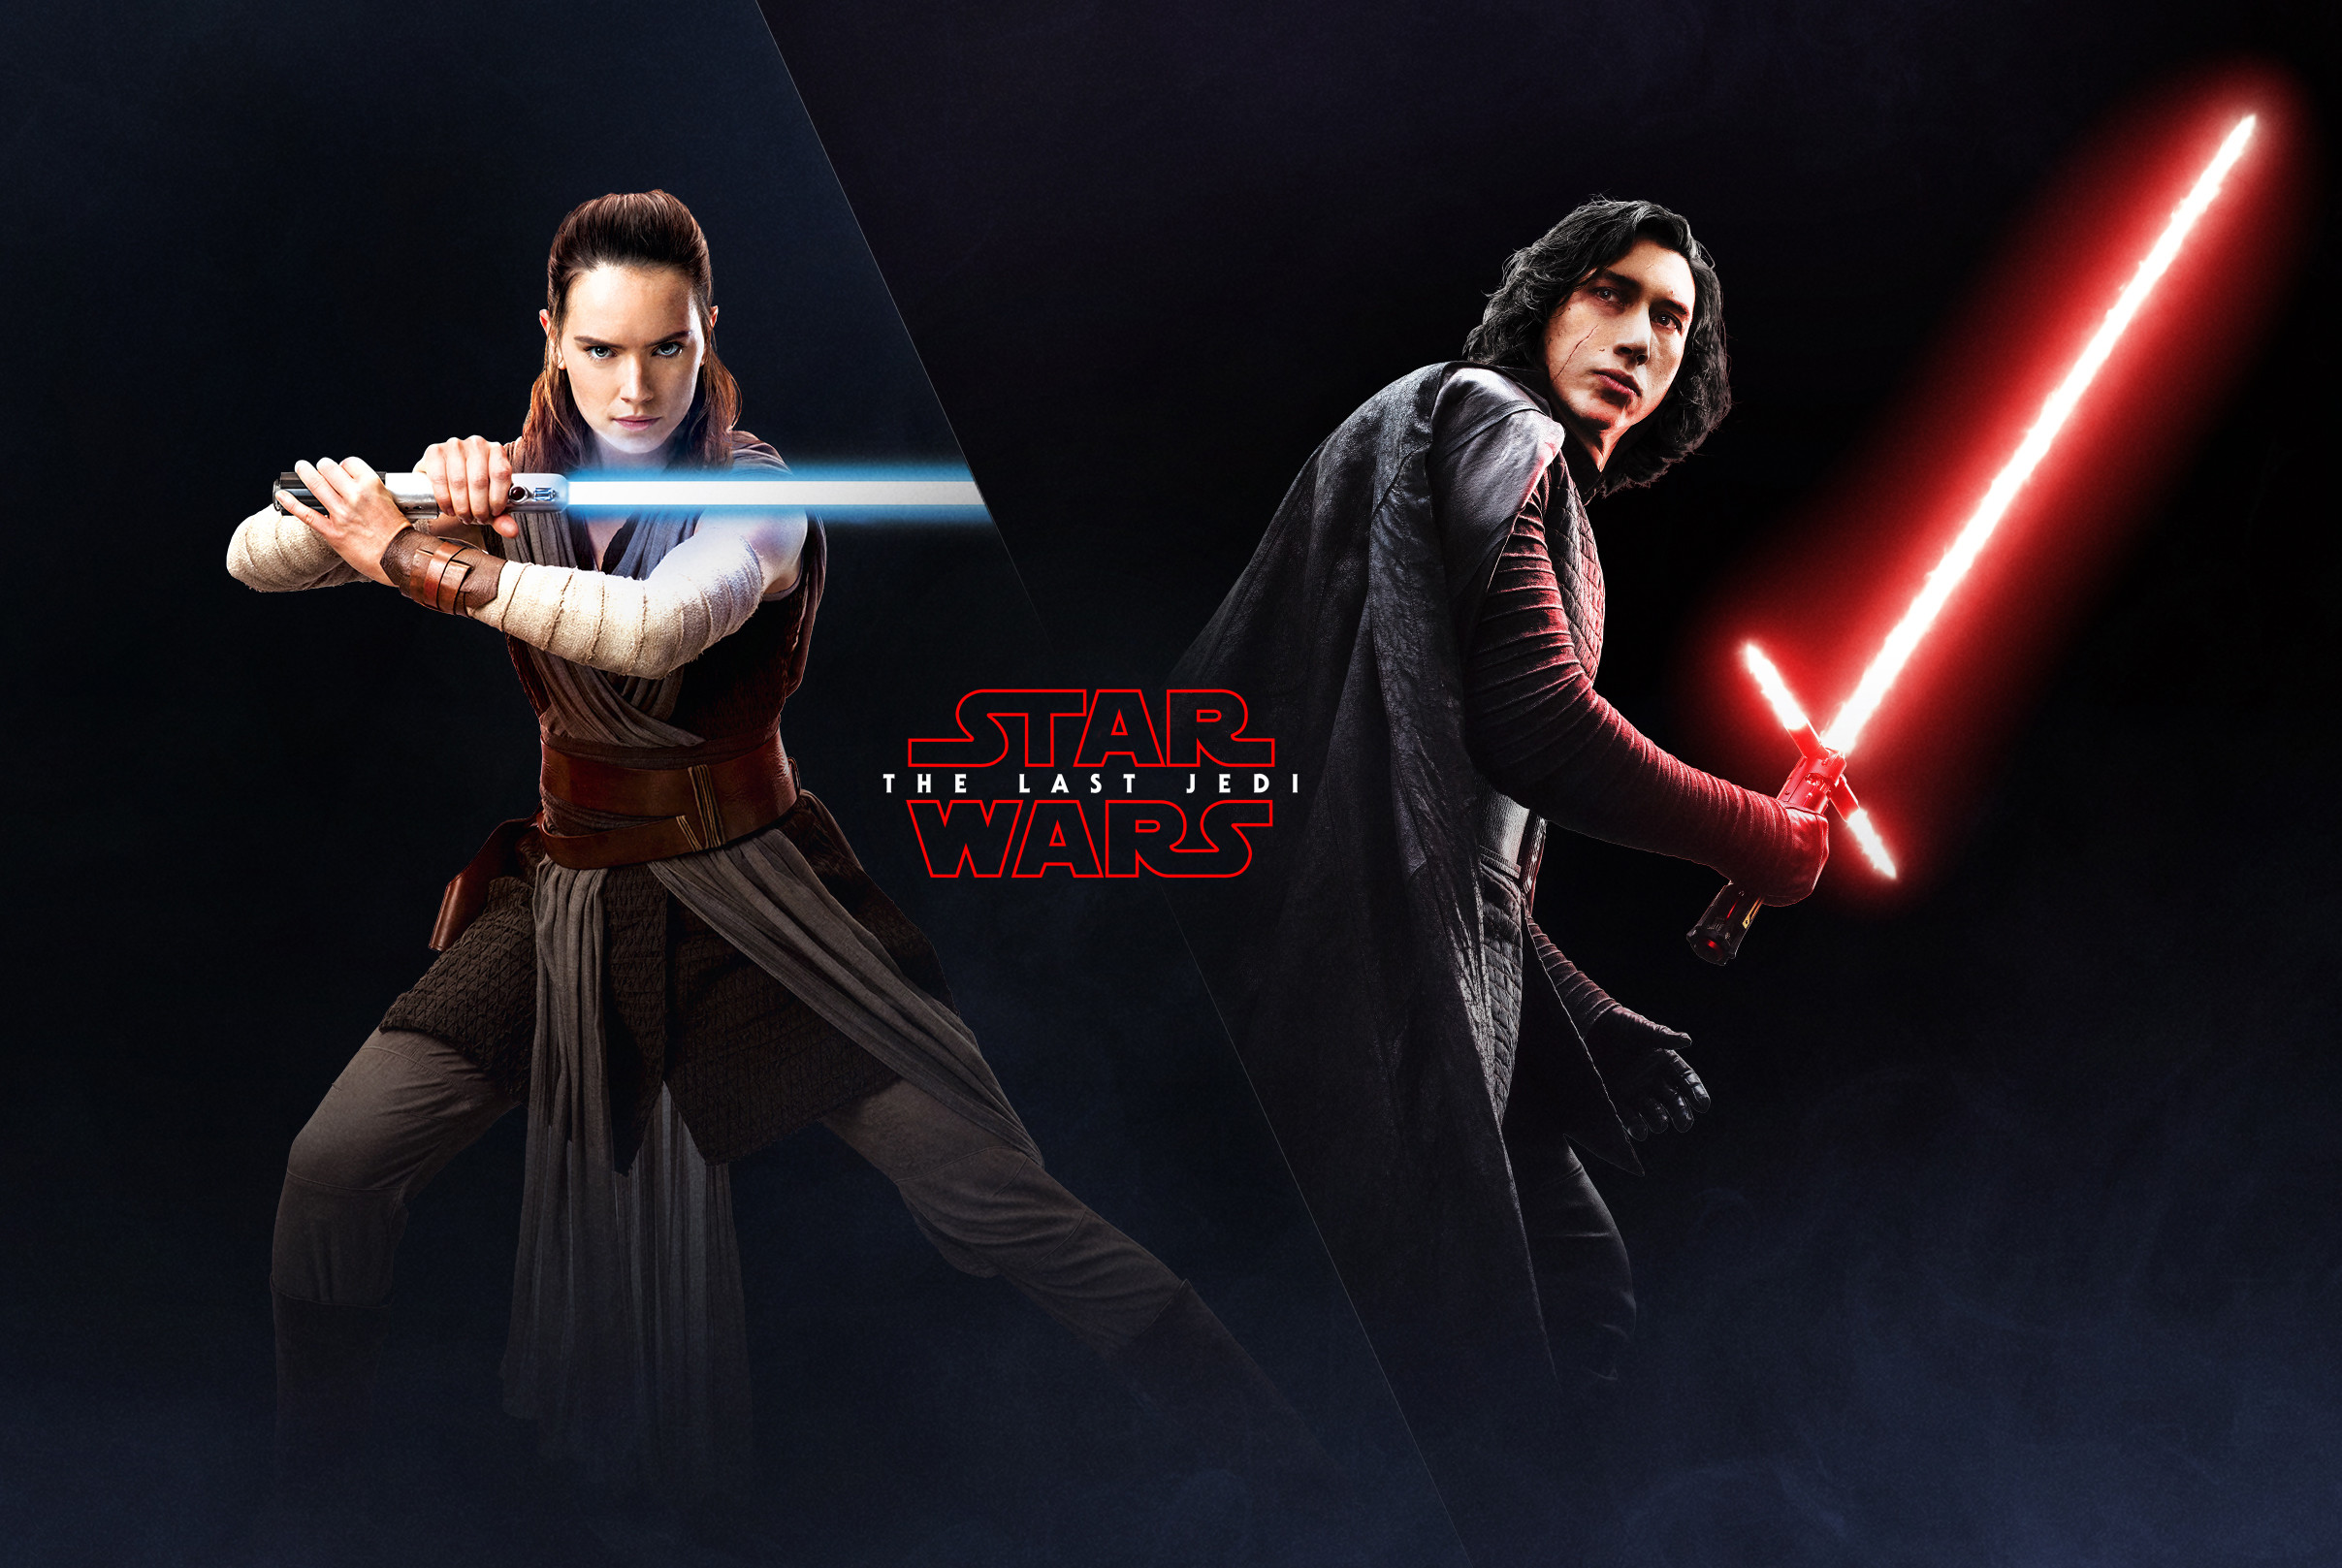 … The Last Jedi Wallpaper Rey and Kylo Ren EA Battlefront 2 Poster 2 HD